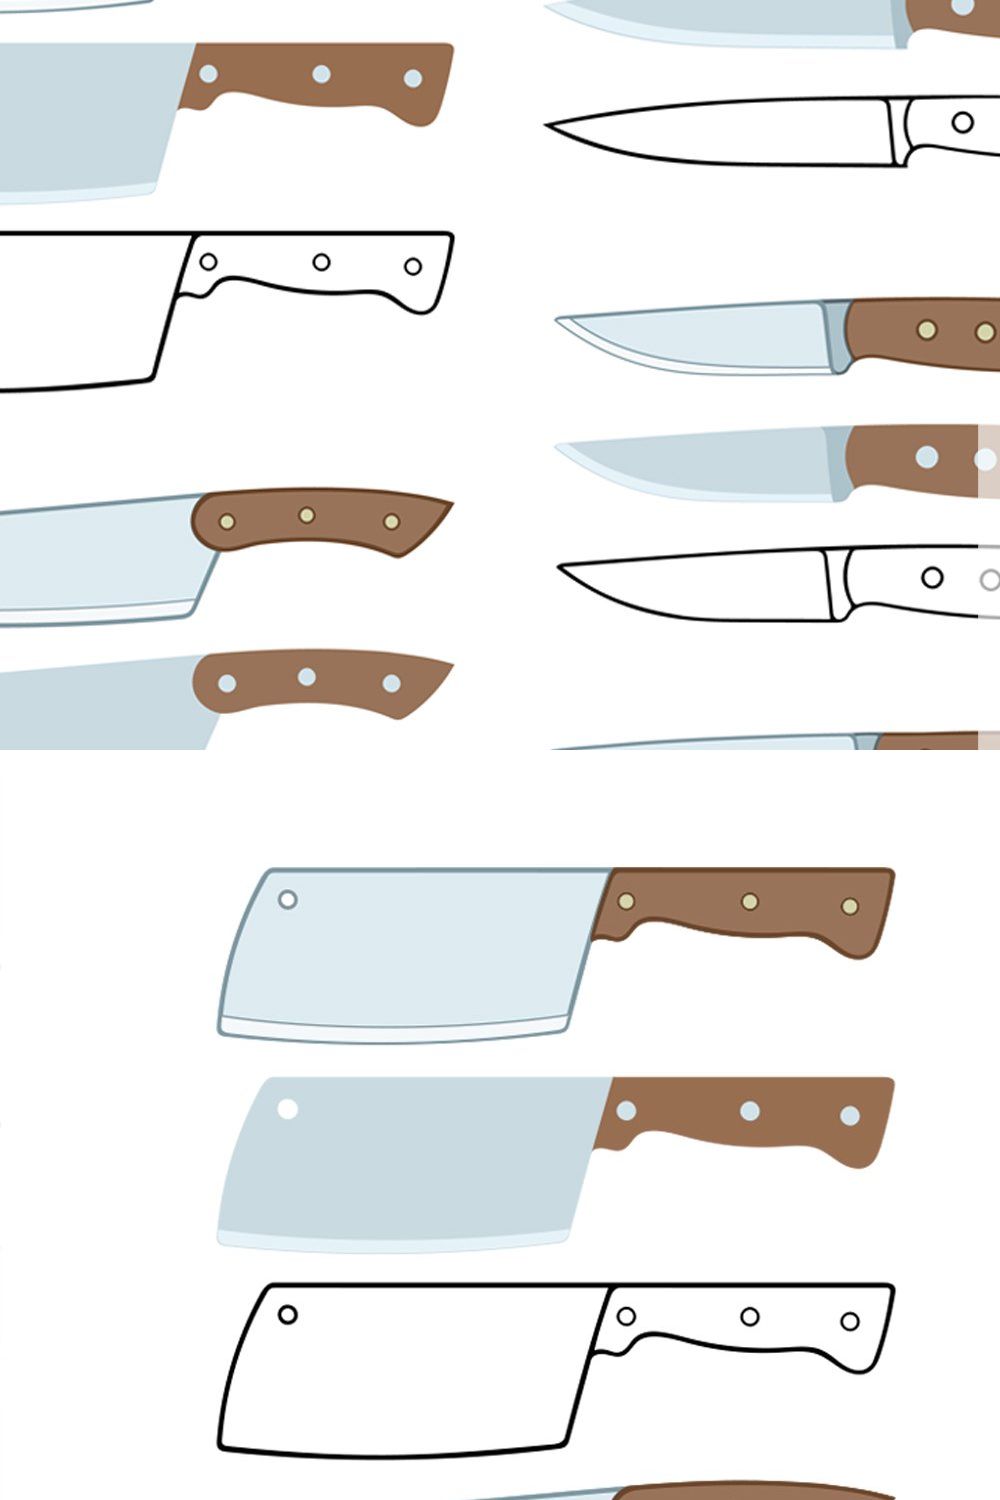 20 types of kitchen knives pinterest preview image.